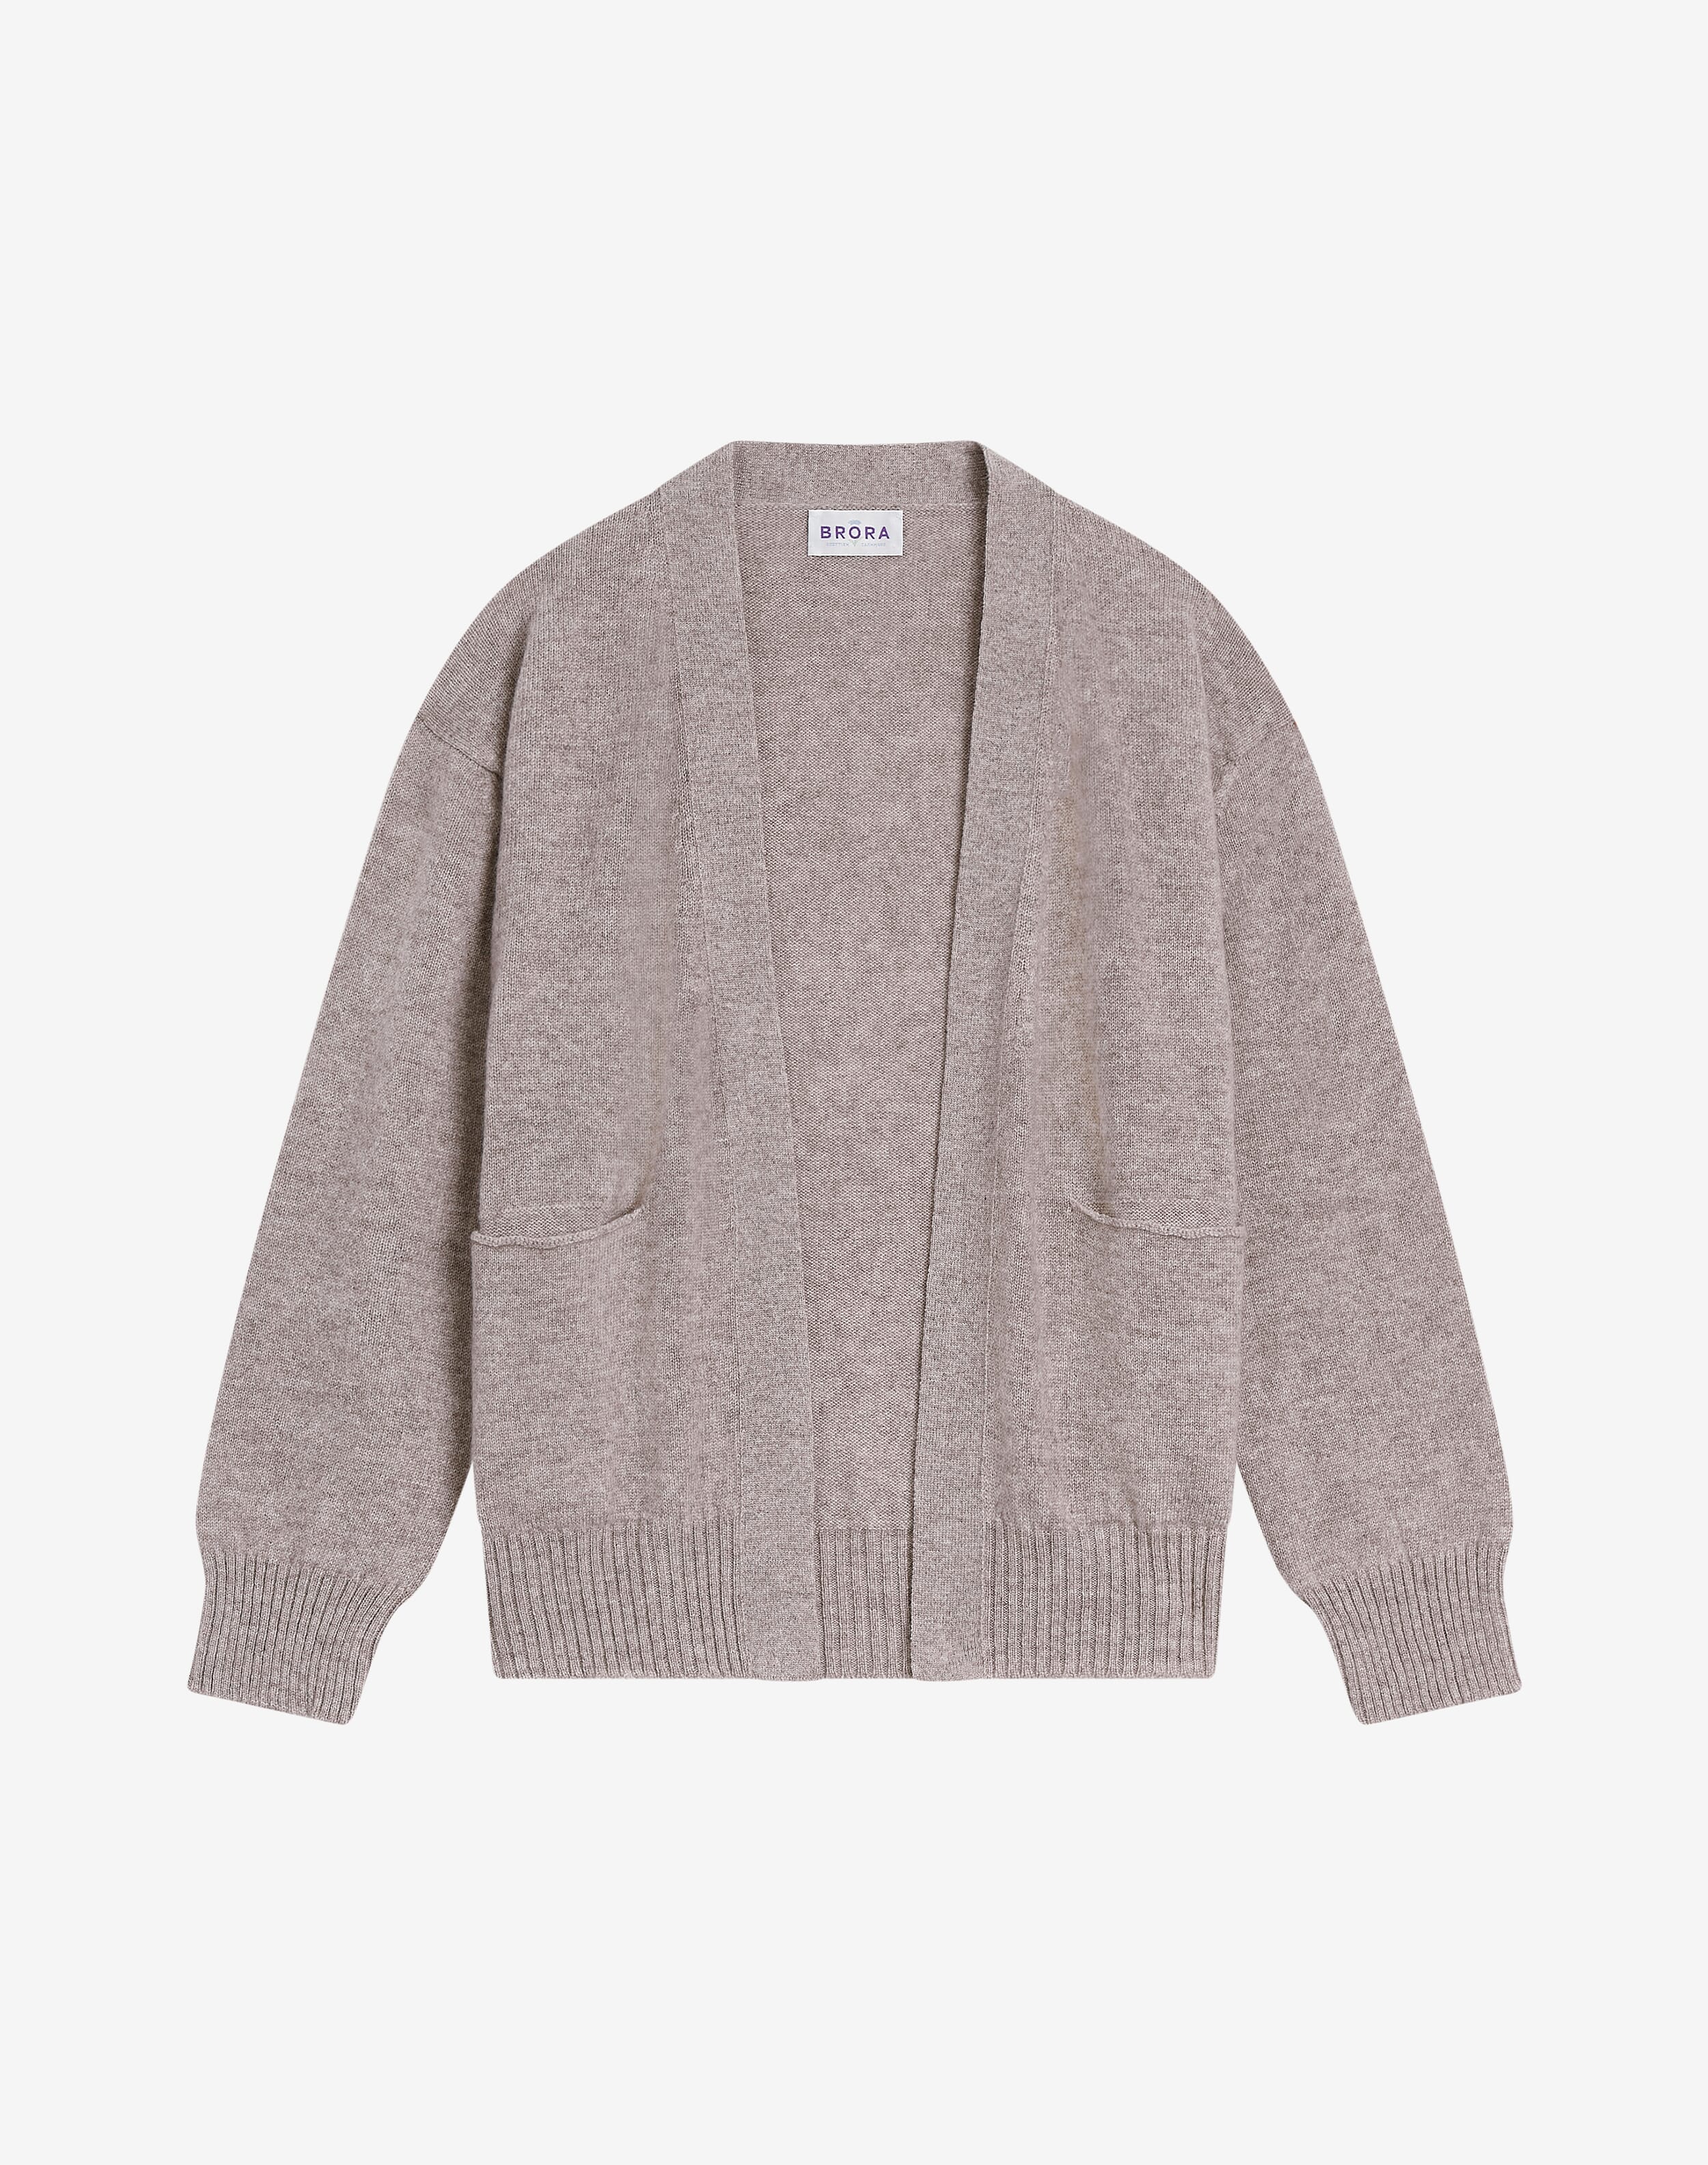 Women's Sustainable Cashmere Cardigans & Wool Cardigans | Brora